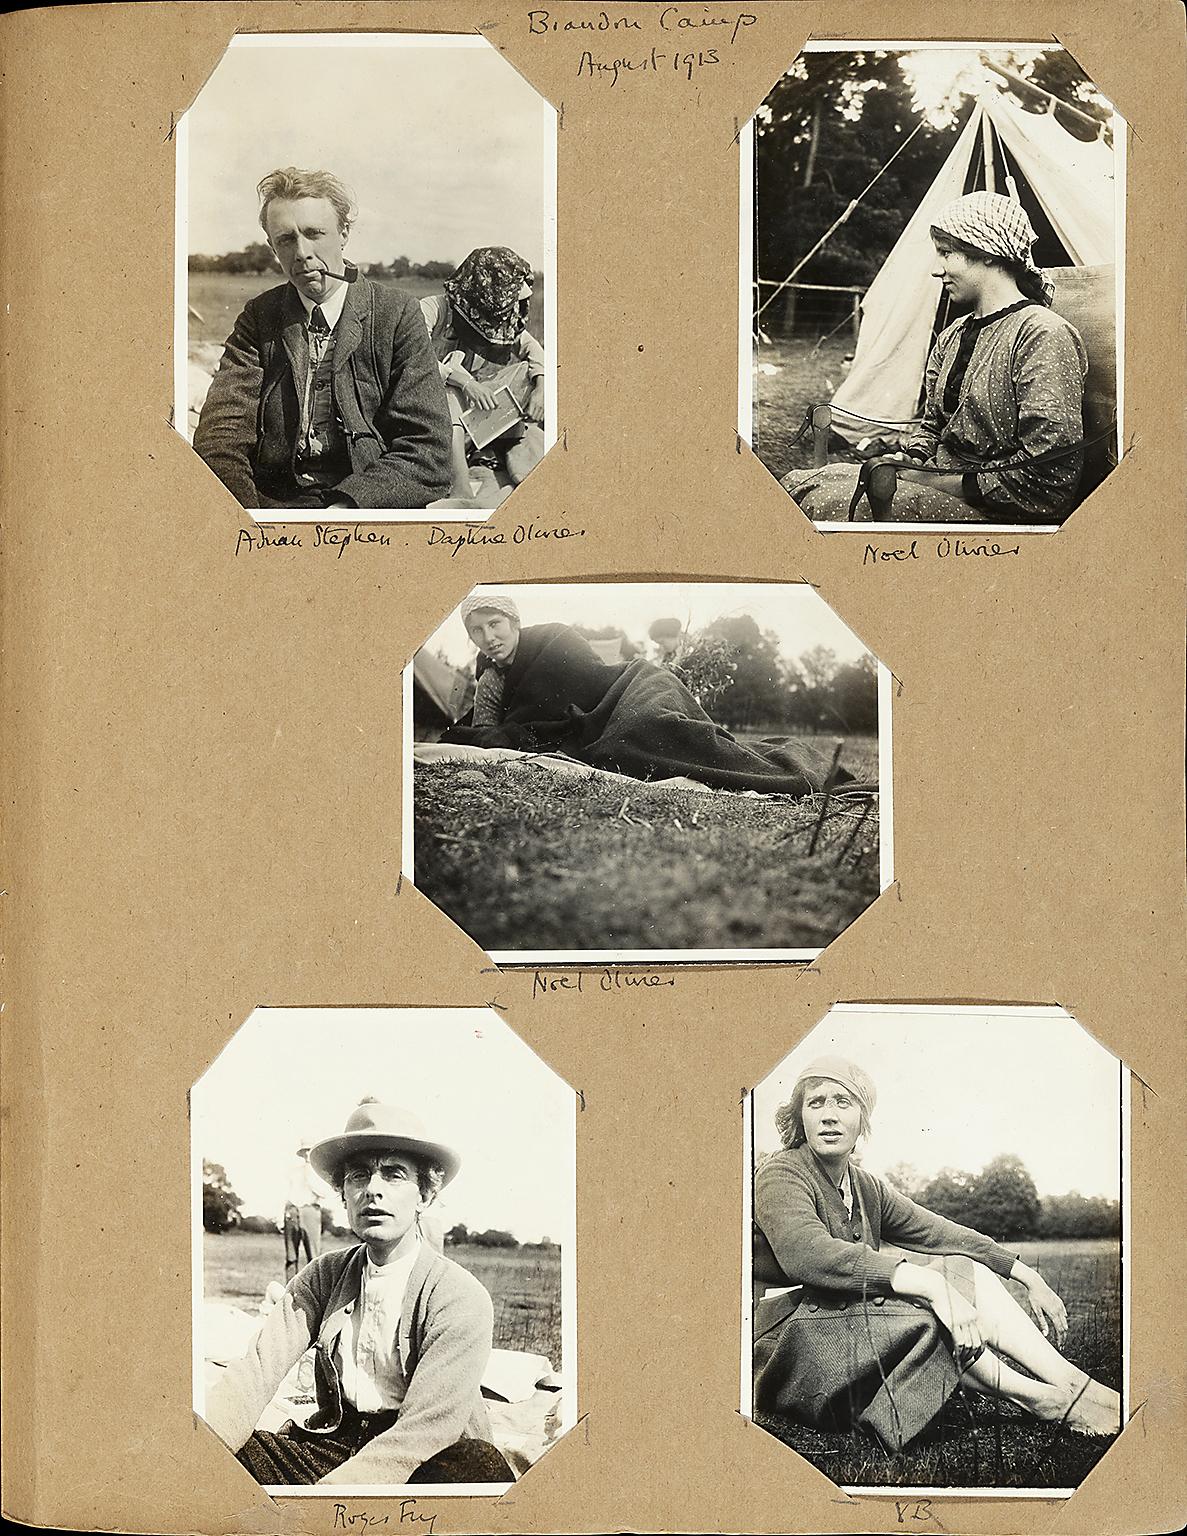 A page from Bell's photo album (Tate Images)